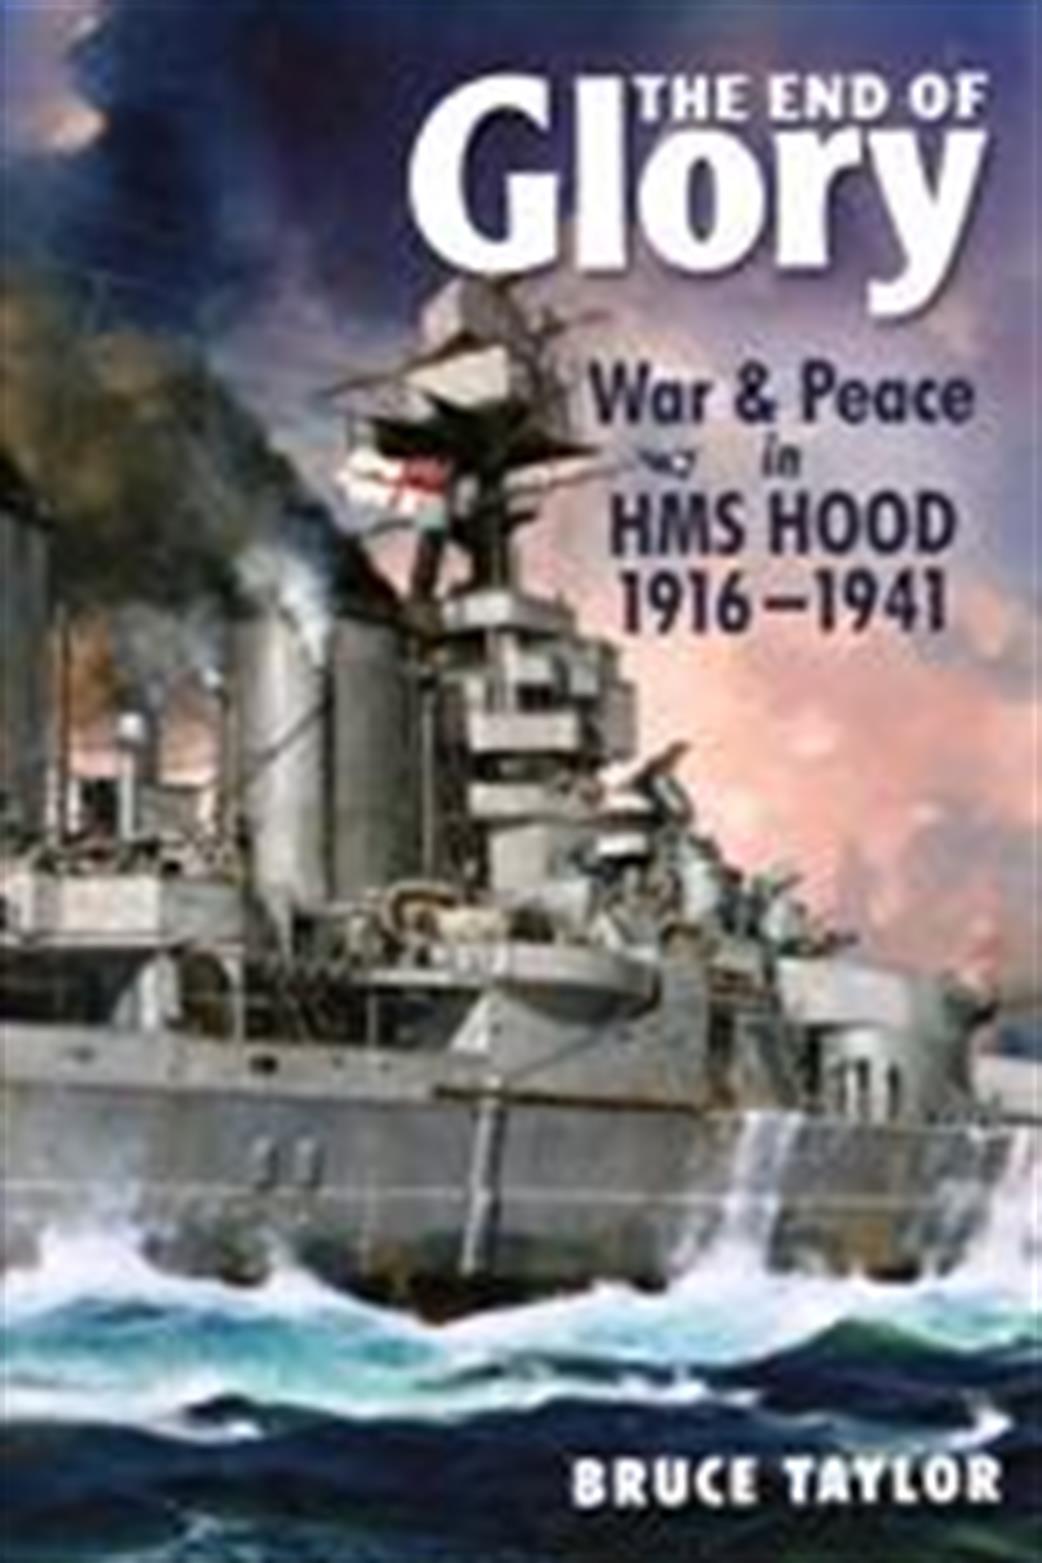 9781848321397 The End Of Glory   War & Peace in HMS Hood 1916-1941